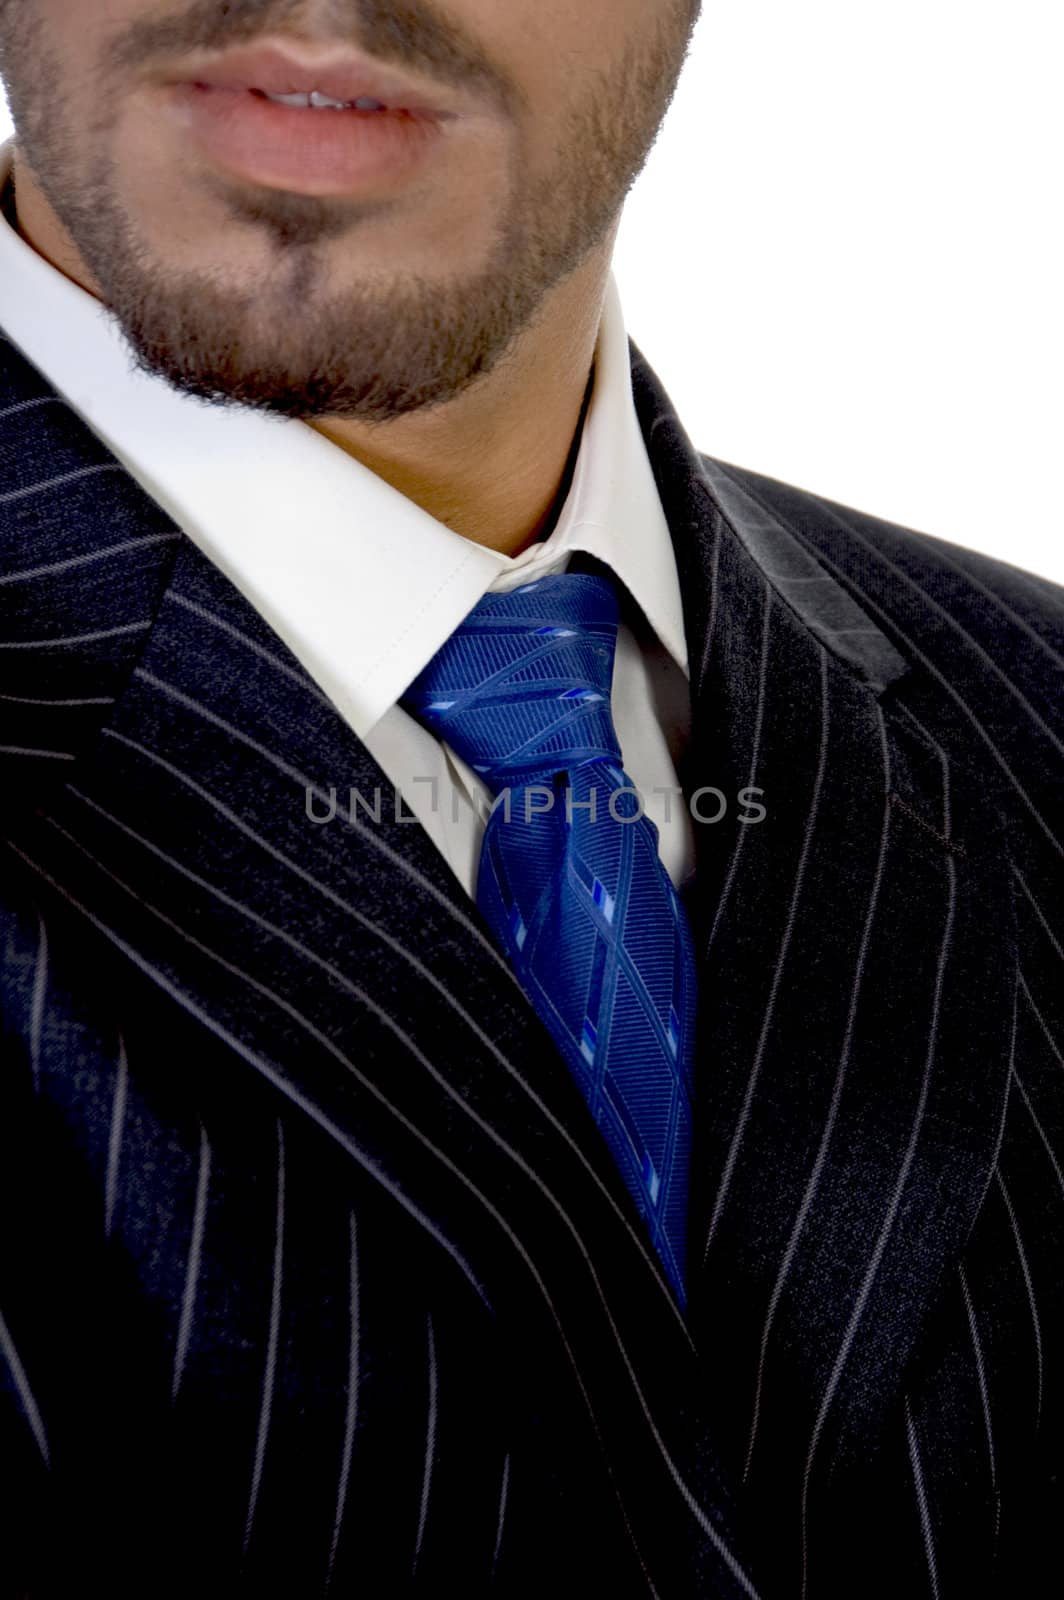 close up of businessperson's tie by imagerymajestic